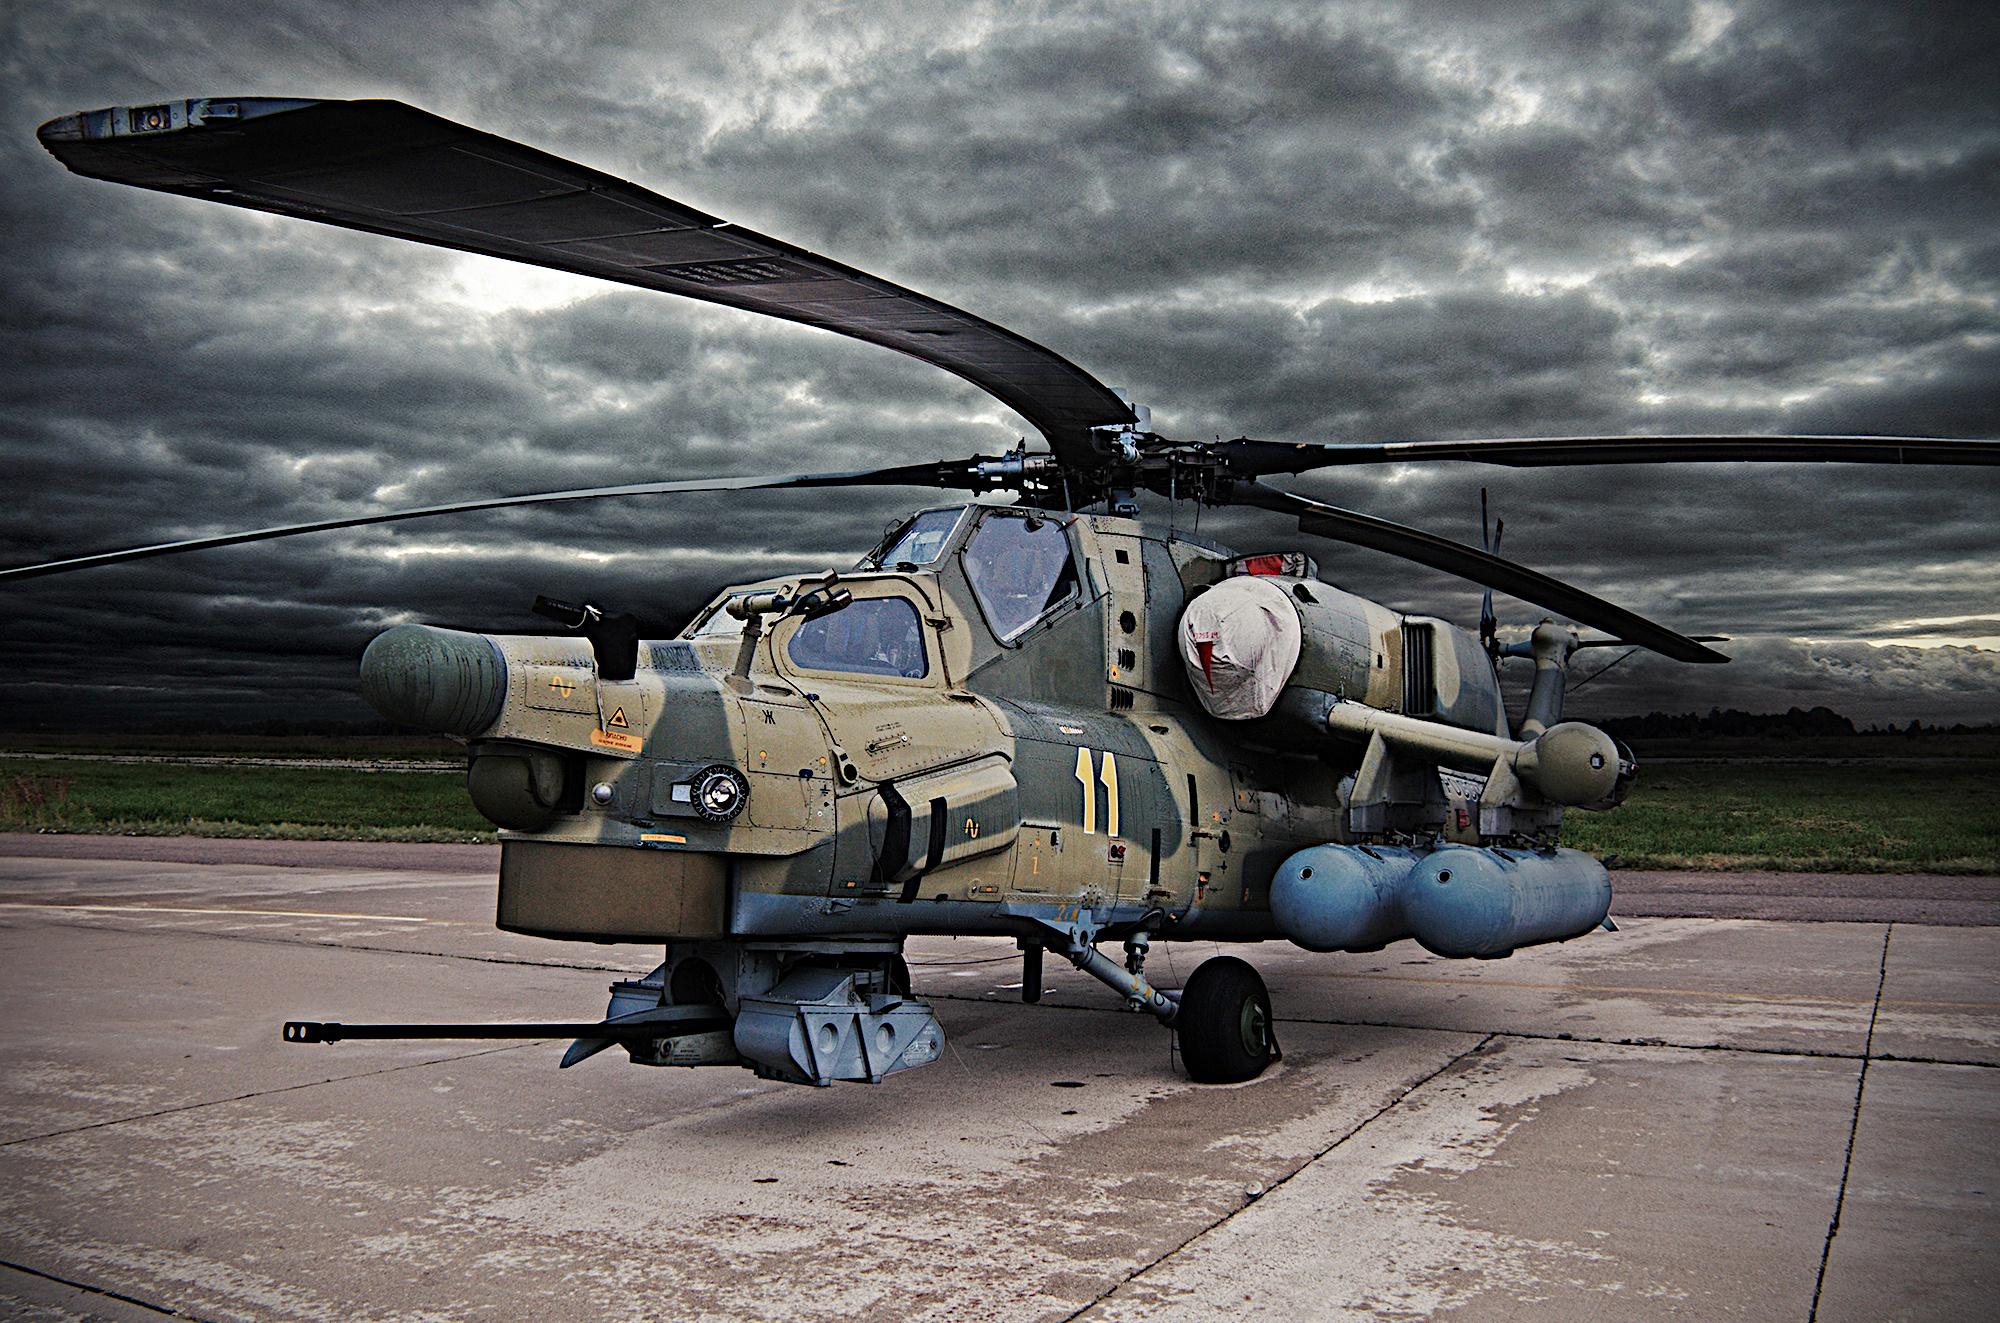 Wallpapers helicopter combat aviation on the desktop